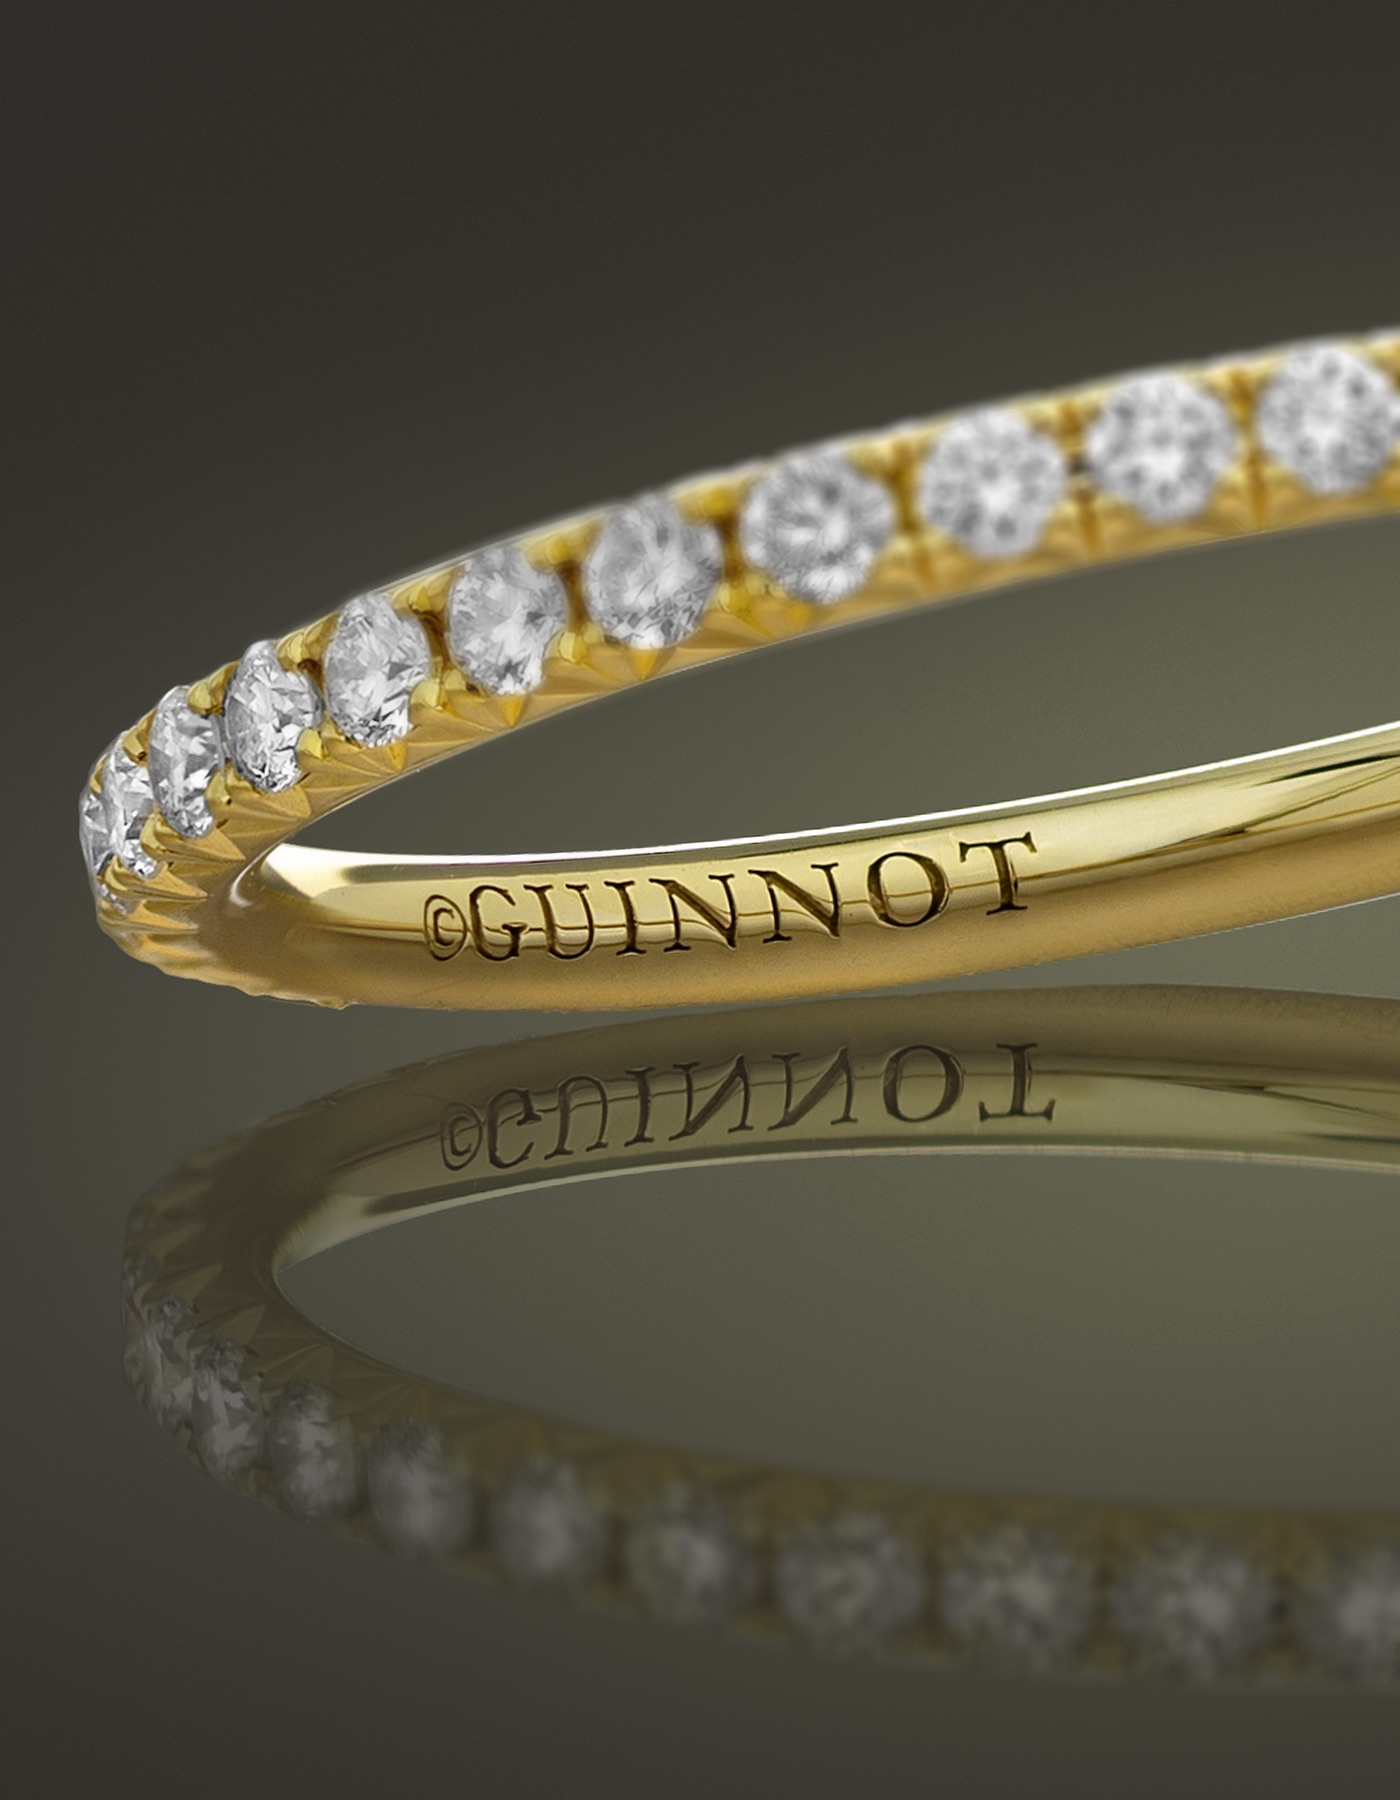 The inside of an yellow golden ring, in which 'Guinnot' is engraved